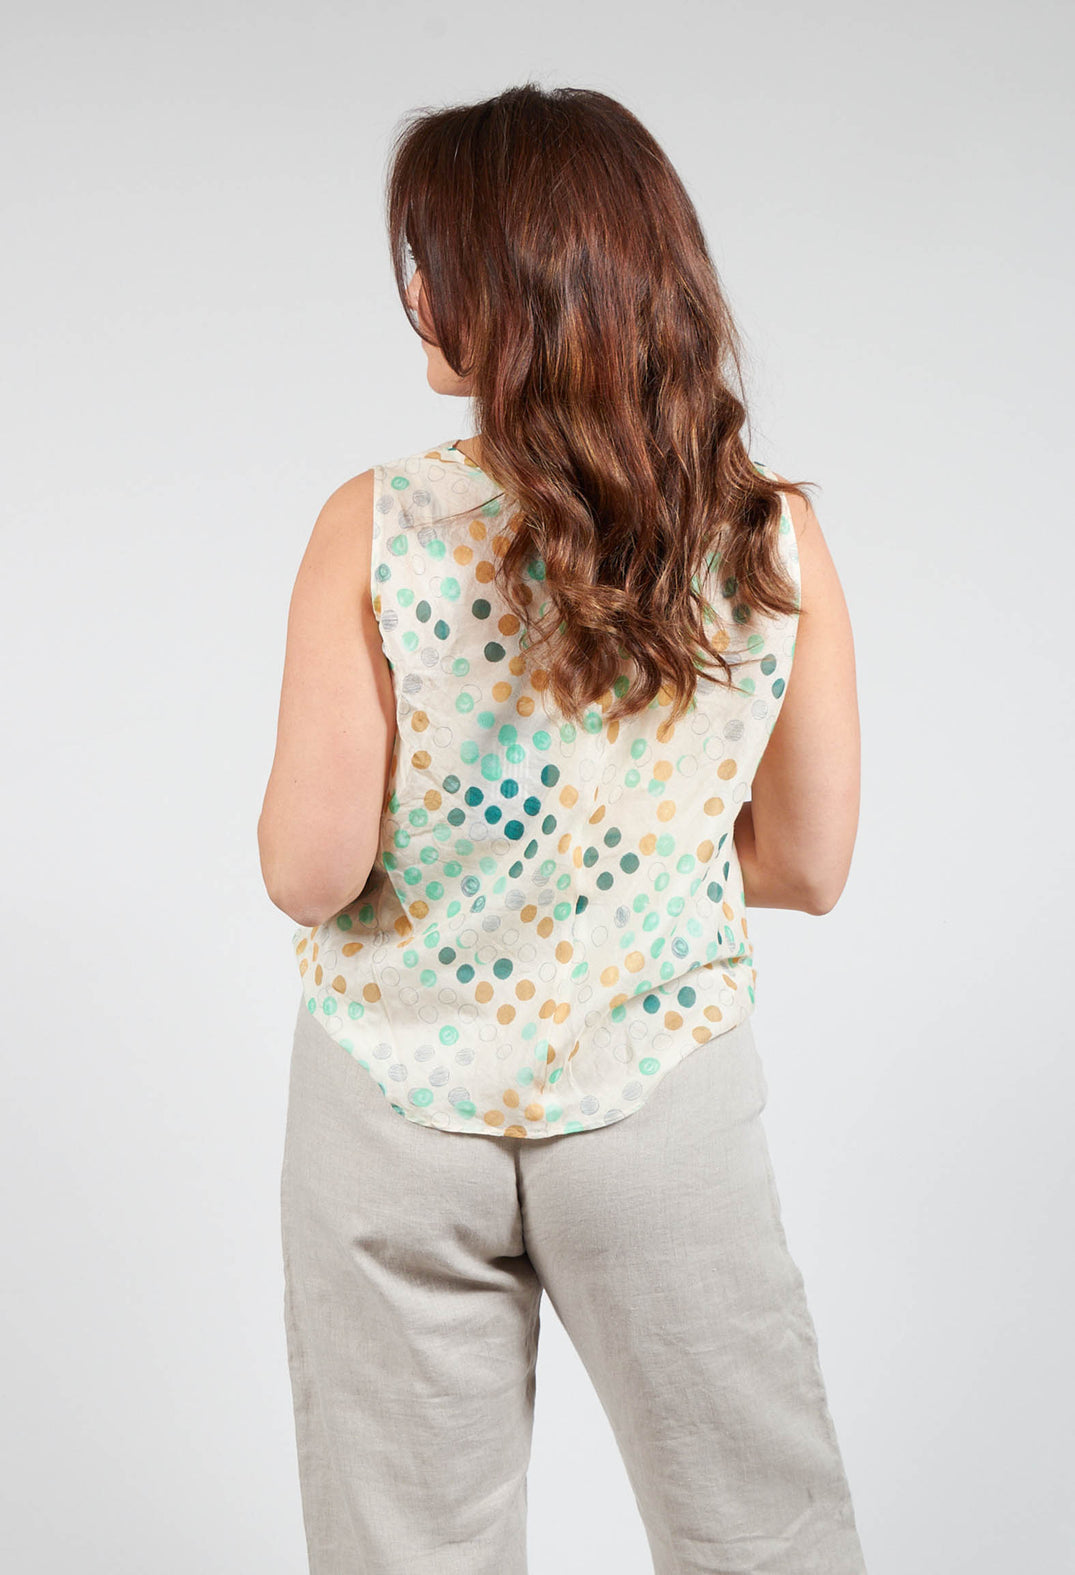 Cotton Sleeveless Top with Gathered Front with Cream and Green Spots